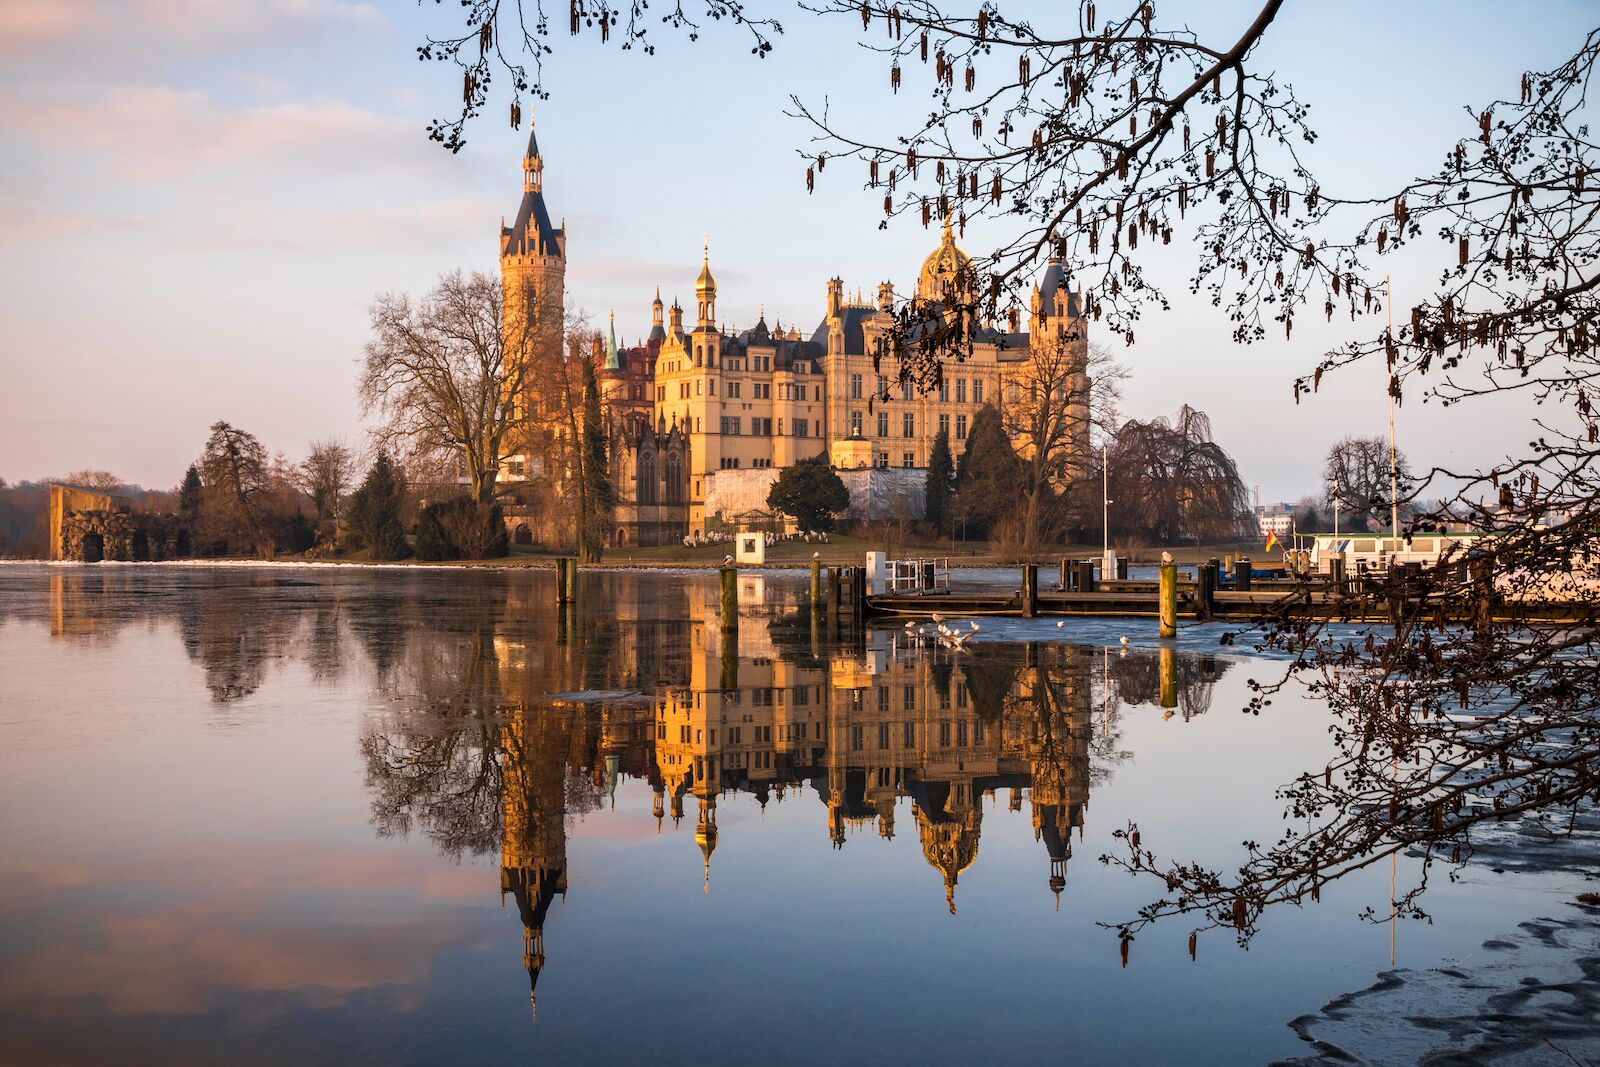 Dawn at Schwerin Castle Palace (Schweriner Schloss), reflected in the water of Schweriner See lake. World Heritage Site in Mecklenburg-West Pomerania, Germany